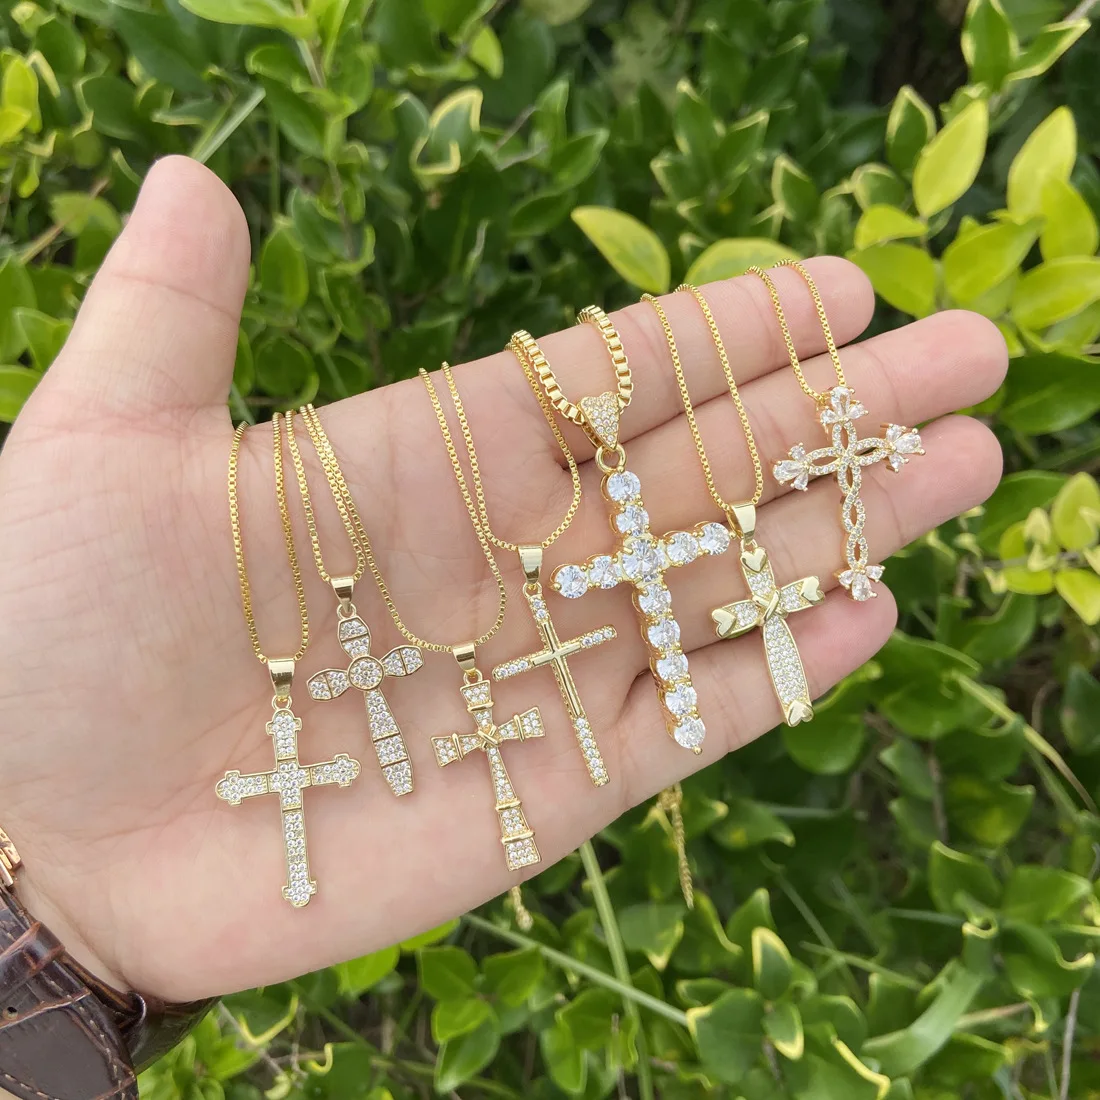 

Hot Selling 18K Gold Christian Cross Pendant Necklace Personality Hip Hop Zircon Pendant Necklace Religion Jewelry (KNK5346), Same as the picture